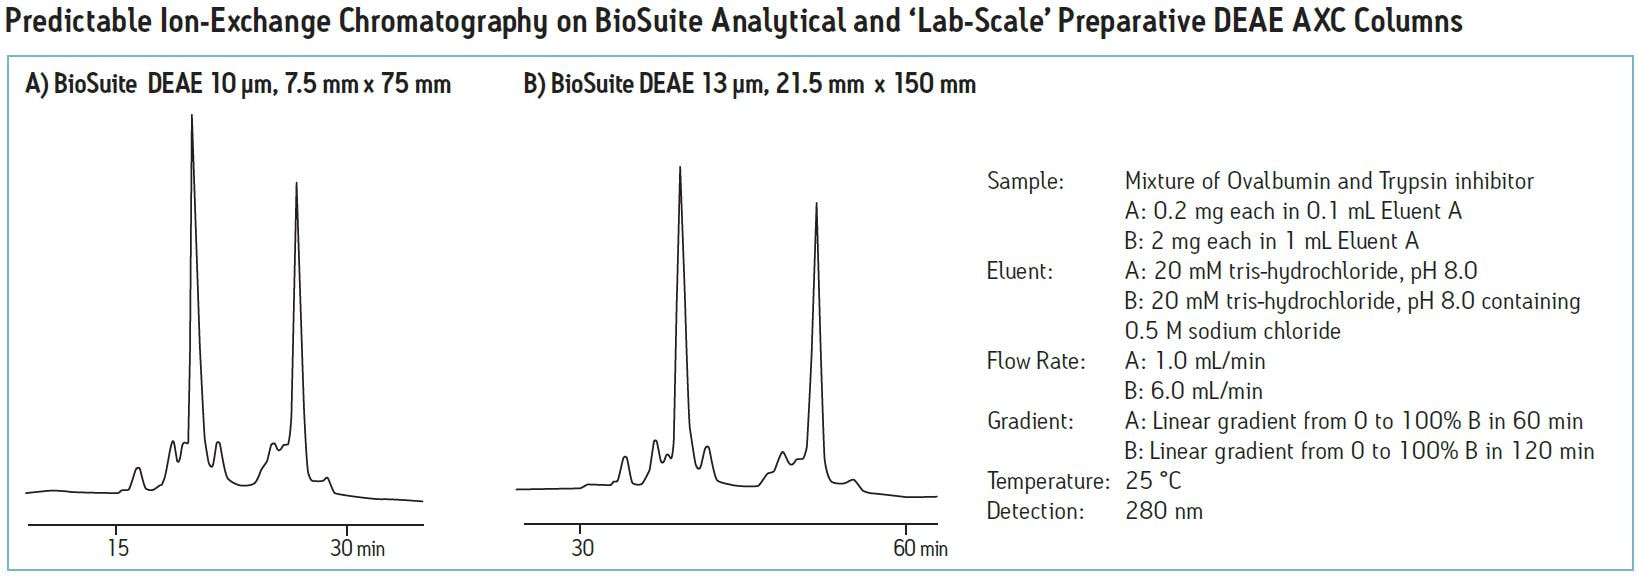 Predictable Ion-Exchange Chromotography on BioSuite Analytical and 'Lab Scale' Preparative DEAE AXC Columns